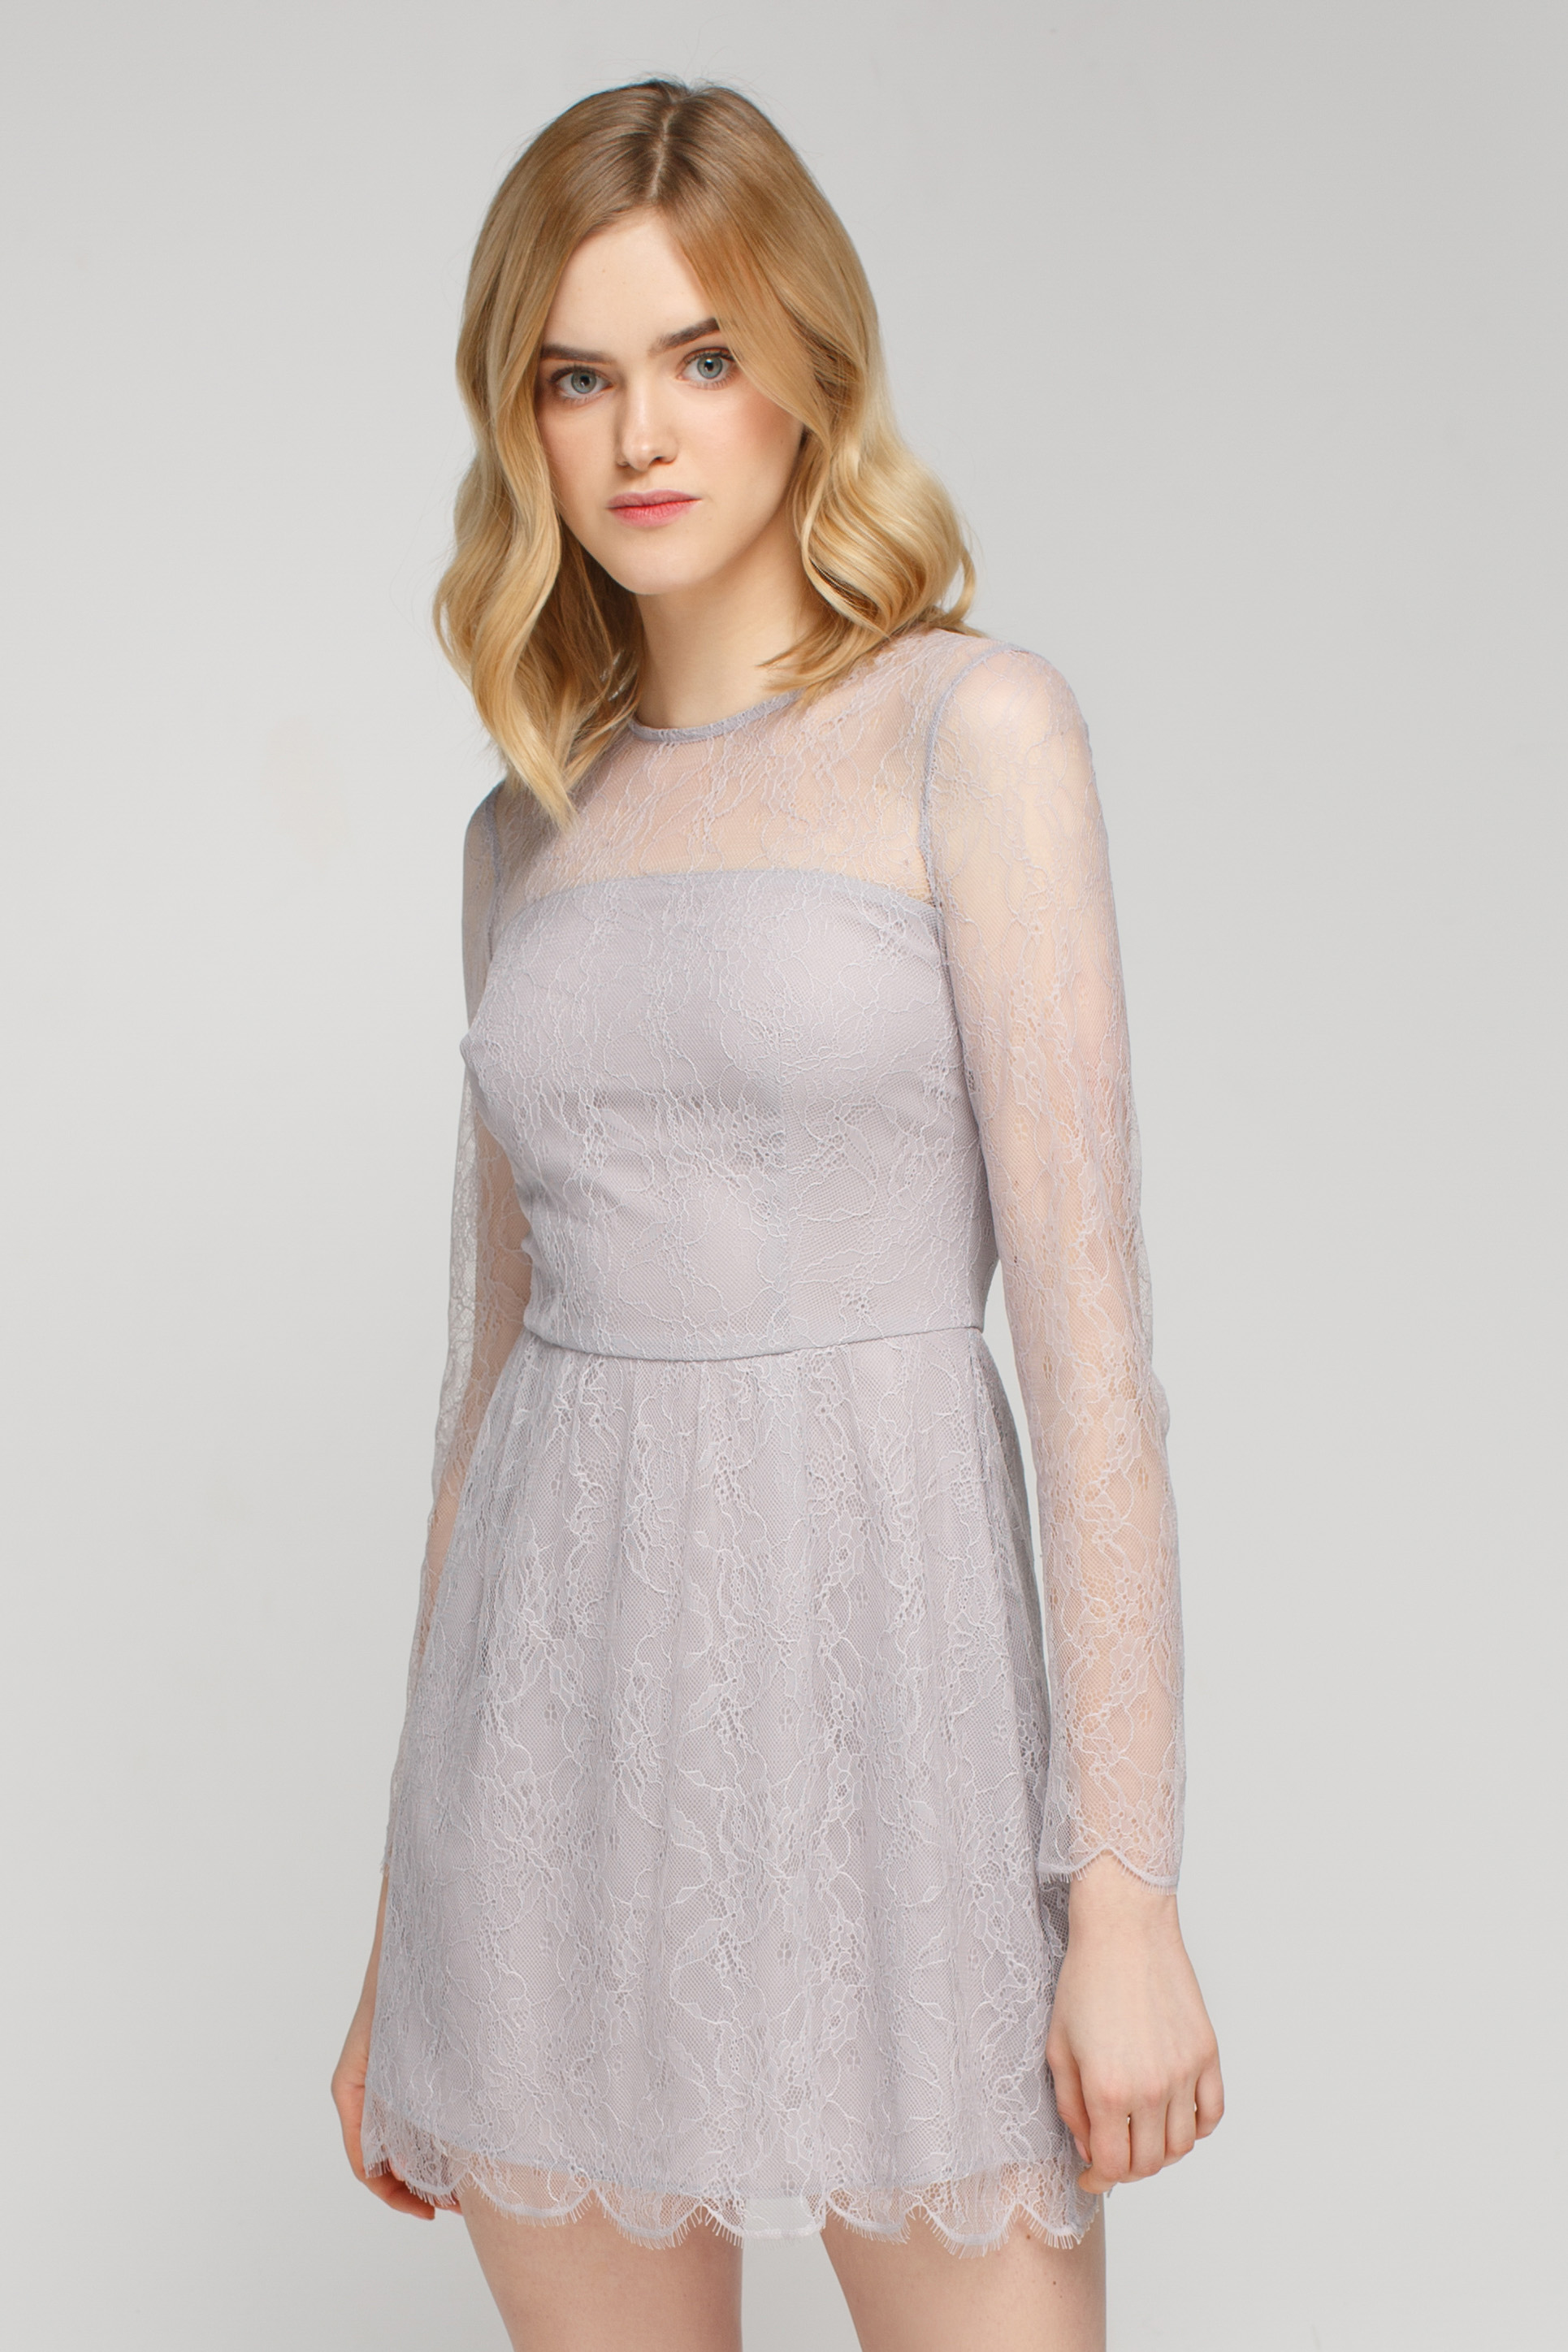 Grey lace mini dress with long sleeves, photo 2